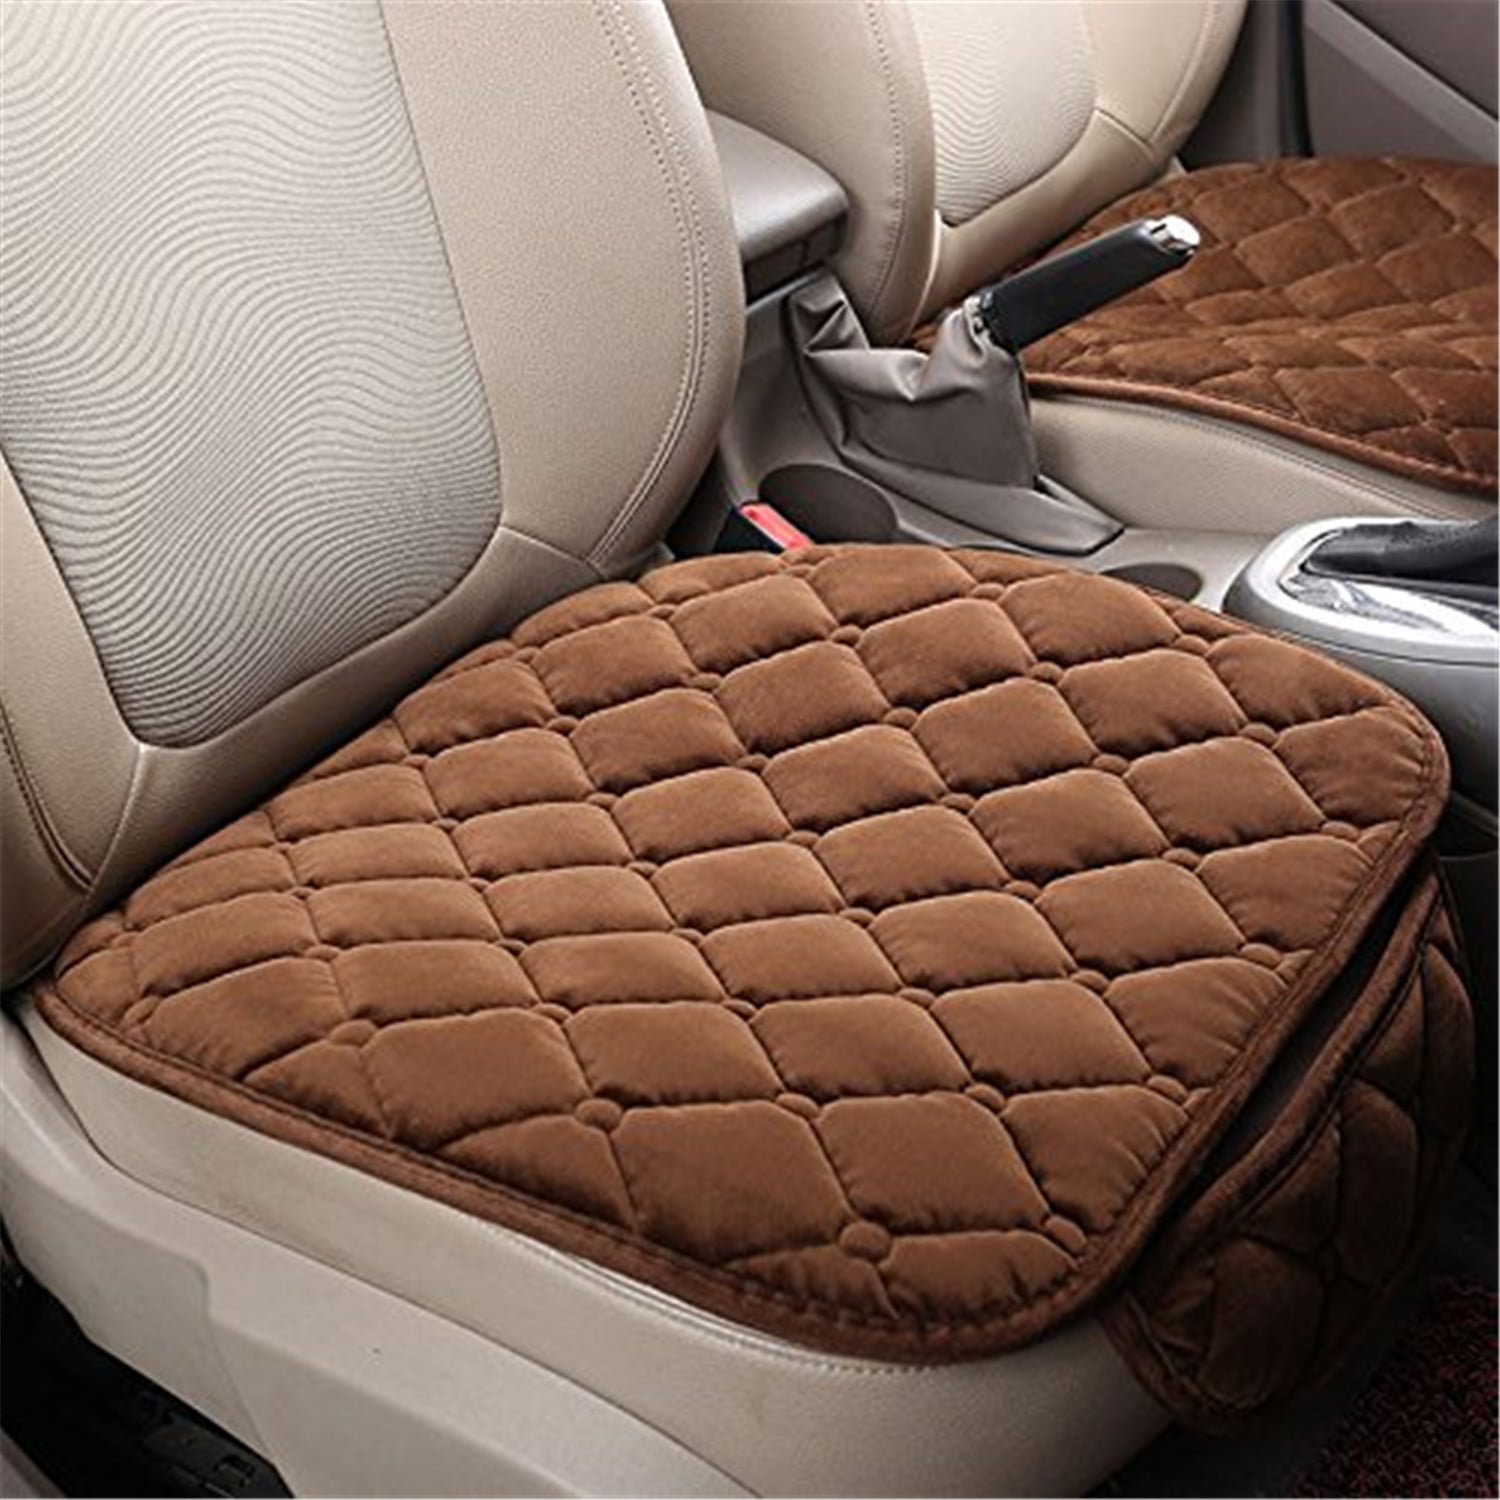 Universal Car Rear Seat Protection Interior Cushion Pad Mat Scratch Proof Nonslip Plush Back Seat Cover Breathable Rear Bench Pad Universal for Cars,Pet,Home Long Sofa Black 